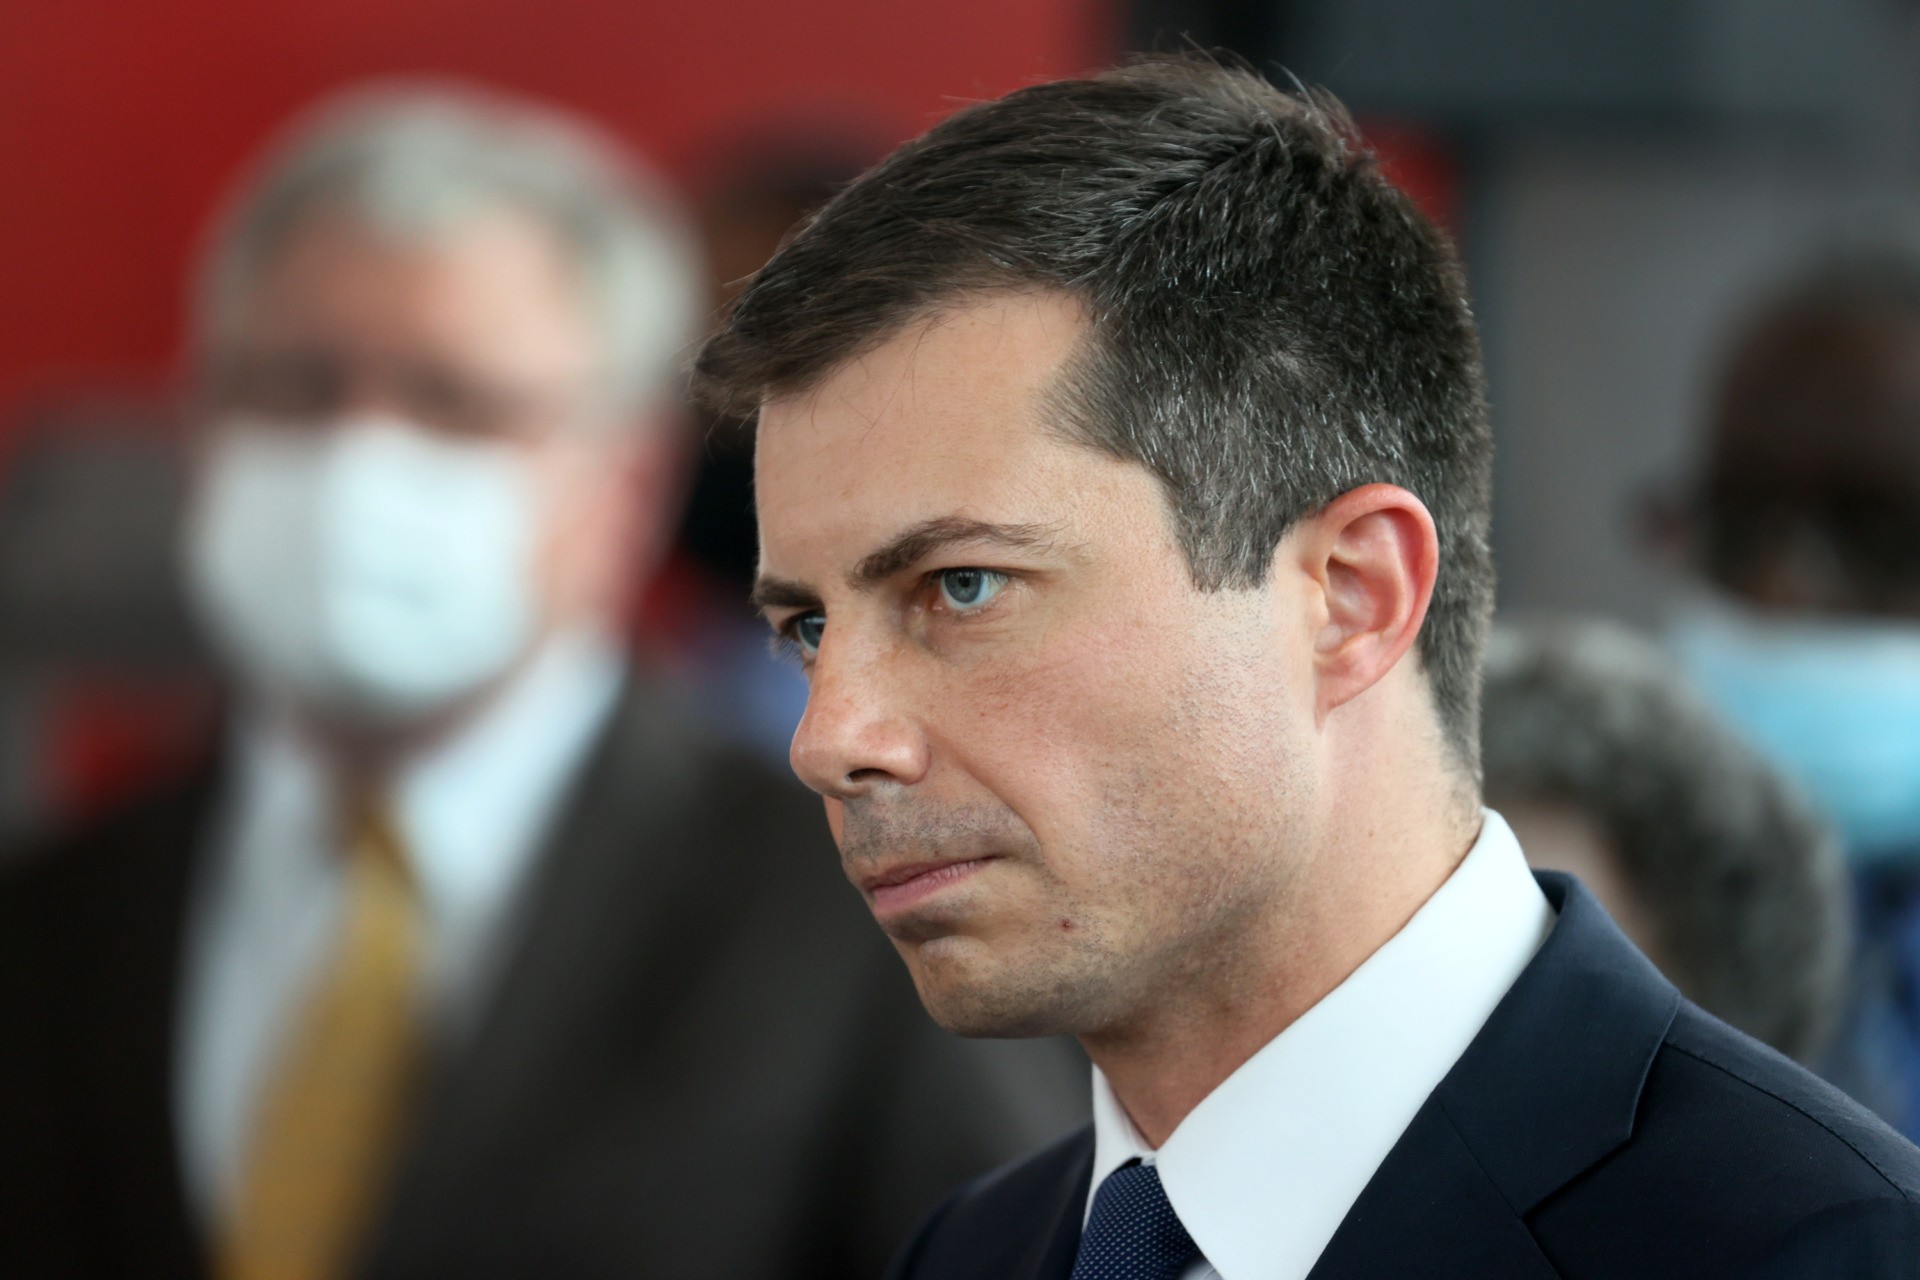 CHICAGO, ILLINOIS - JULY 16: Transportation Secretary Pete Buttigieg listens to a question during a press conference following a tour of a Southside transportation hub on July 16, 2021 in Chicago, Illinois. Buttigieg was in town to rally support for President Biden’s $1.2 trillion roads and bridges infrastructure plan. (Photo by Scott Olson/Getty Images)